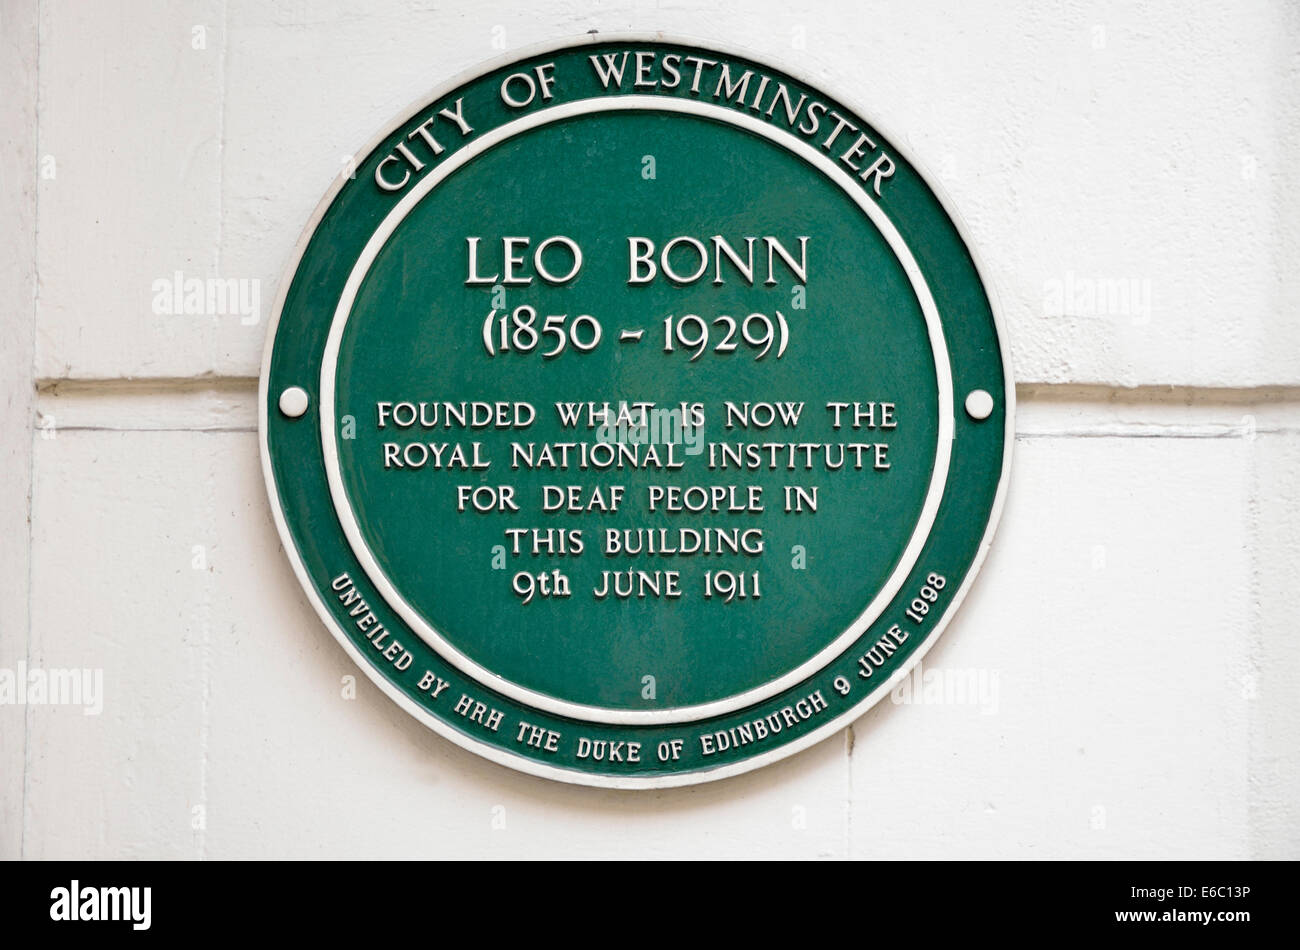 London, England, UK. Commemorative Plaque for Leo Bonn (1850-1929) founded the Royal National Institute for the Deaf in this bui Stock Photo